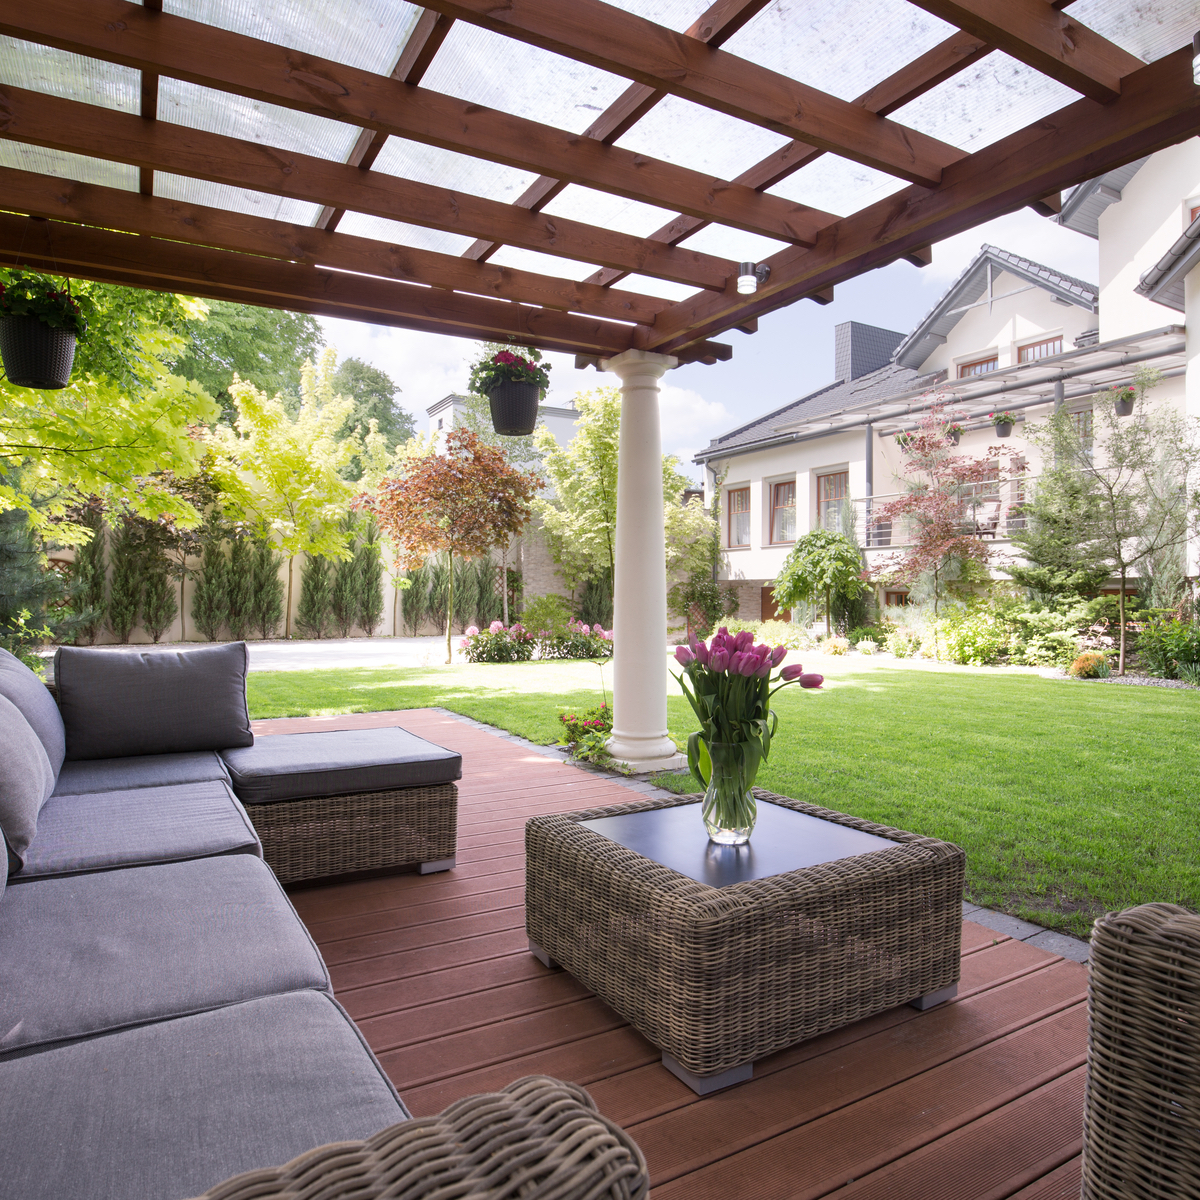 Outdoor space with a covered pergola